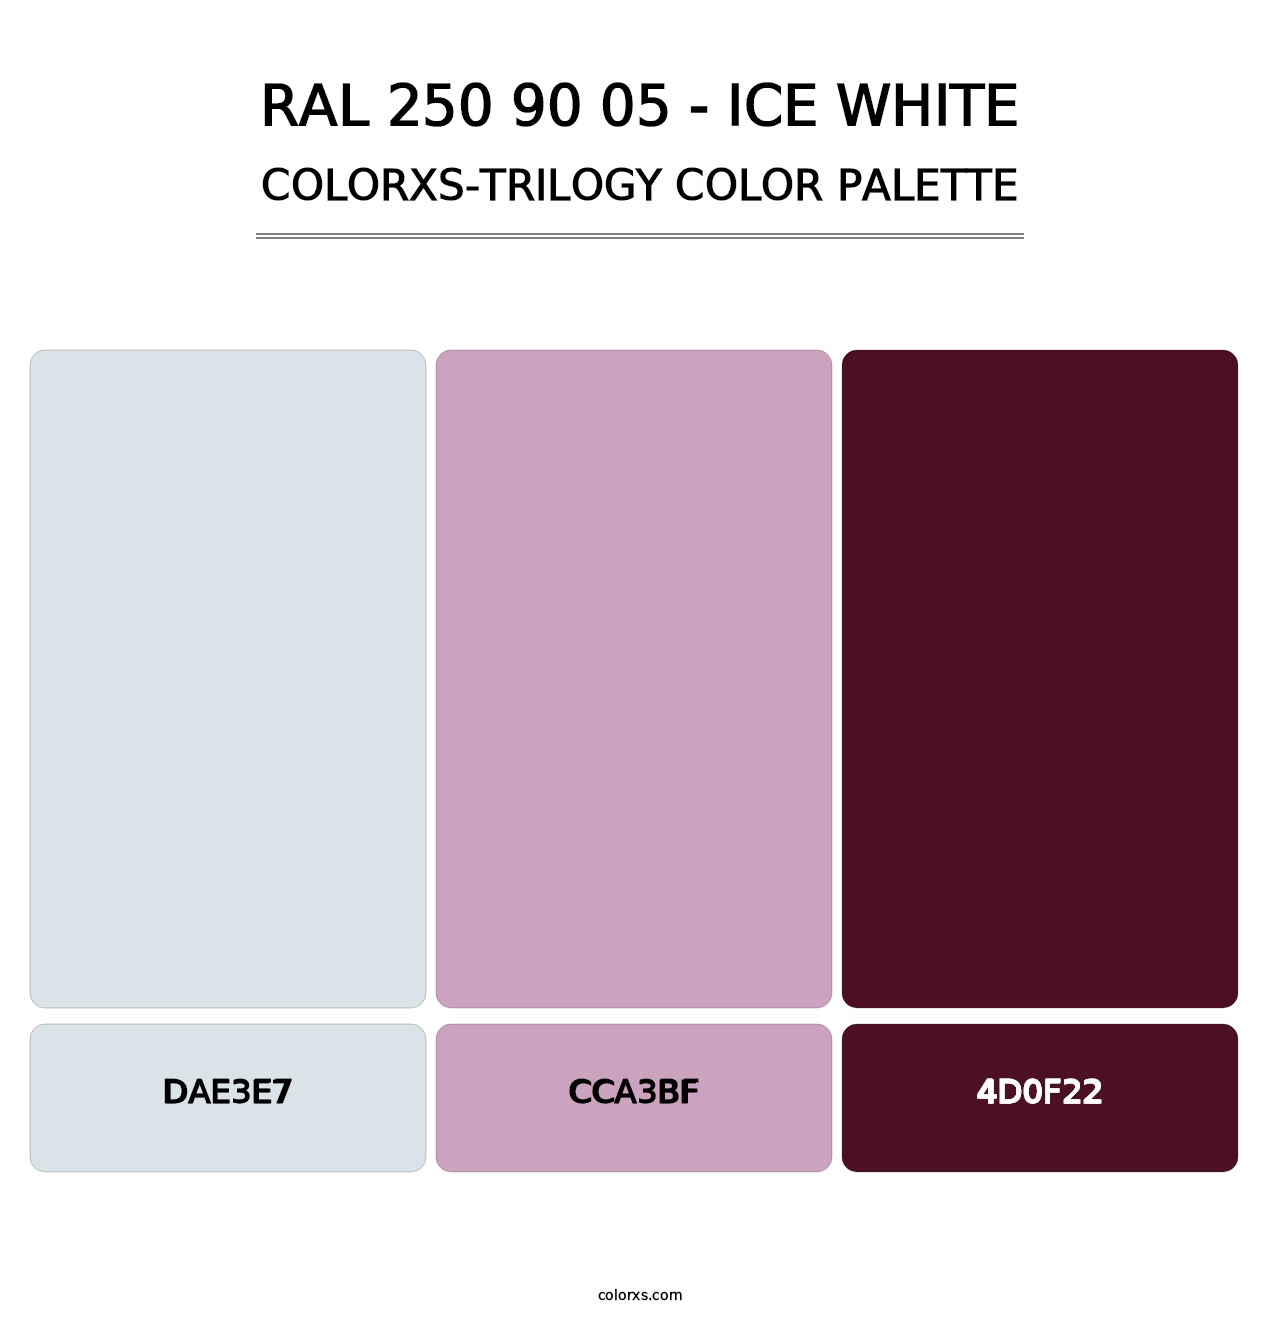 RAL 250 90 05 - Ice White - Colorxs Trilogy Palette